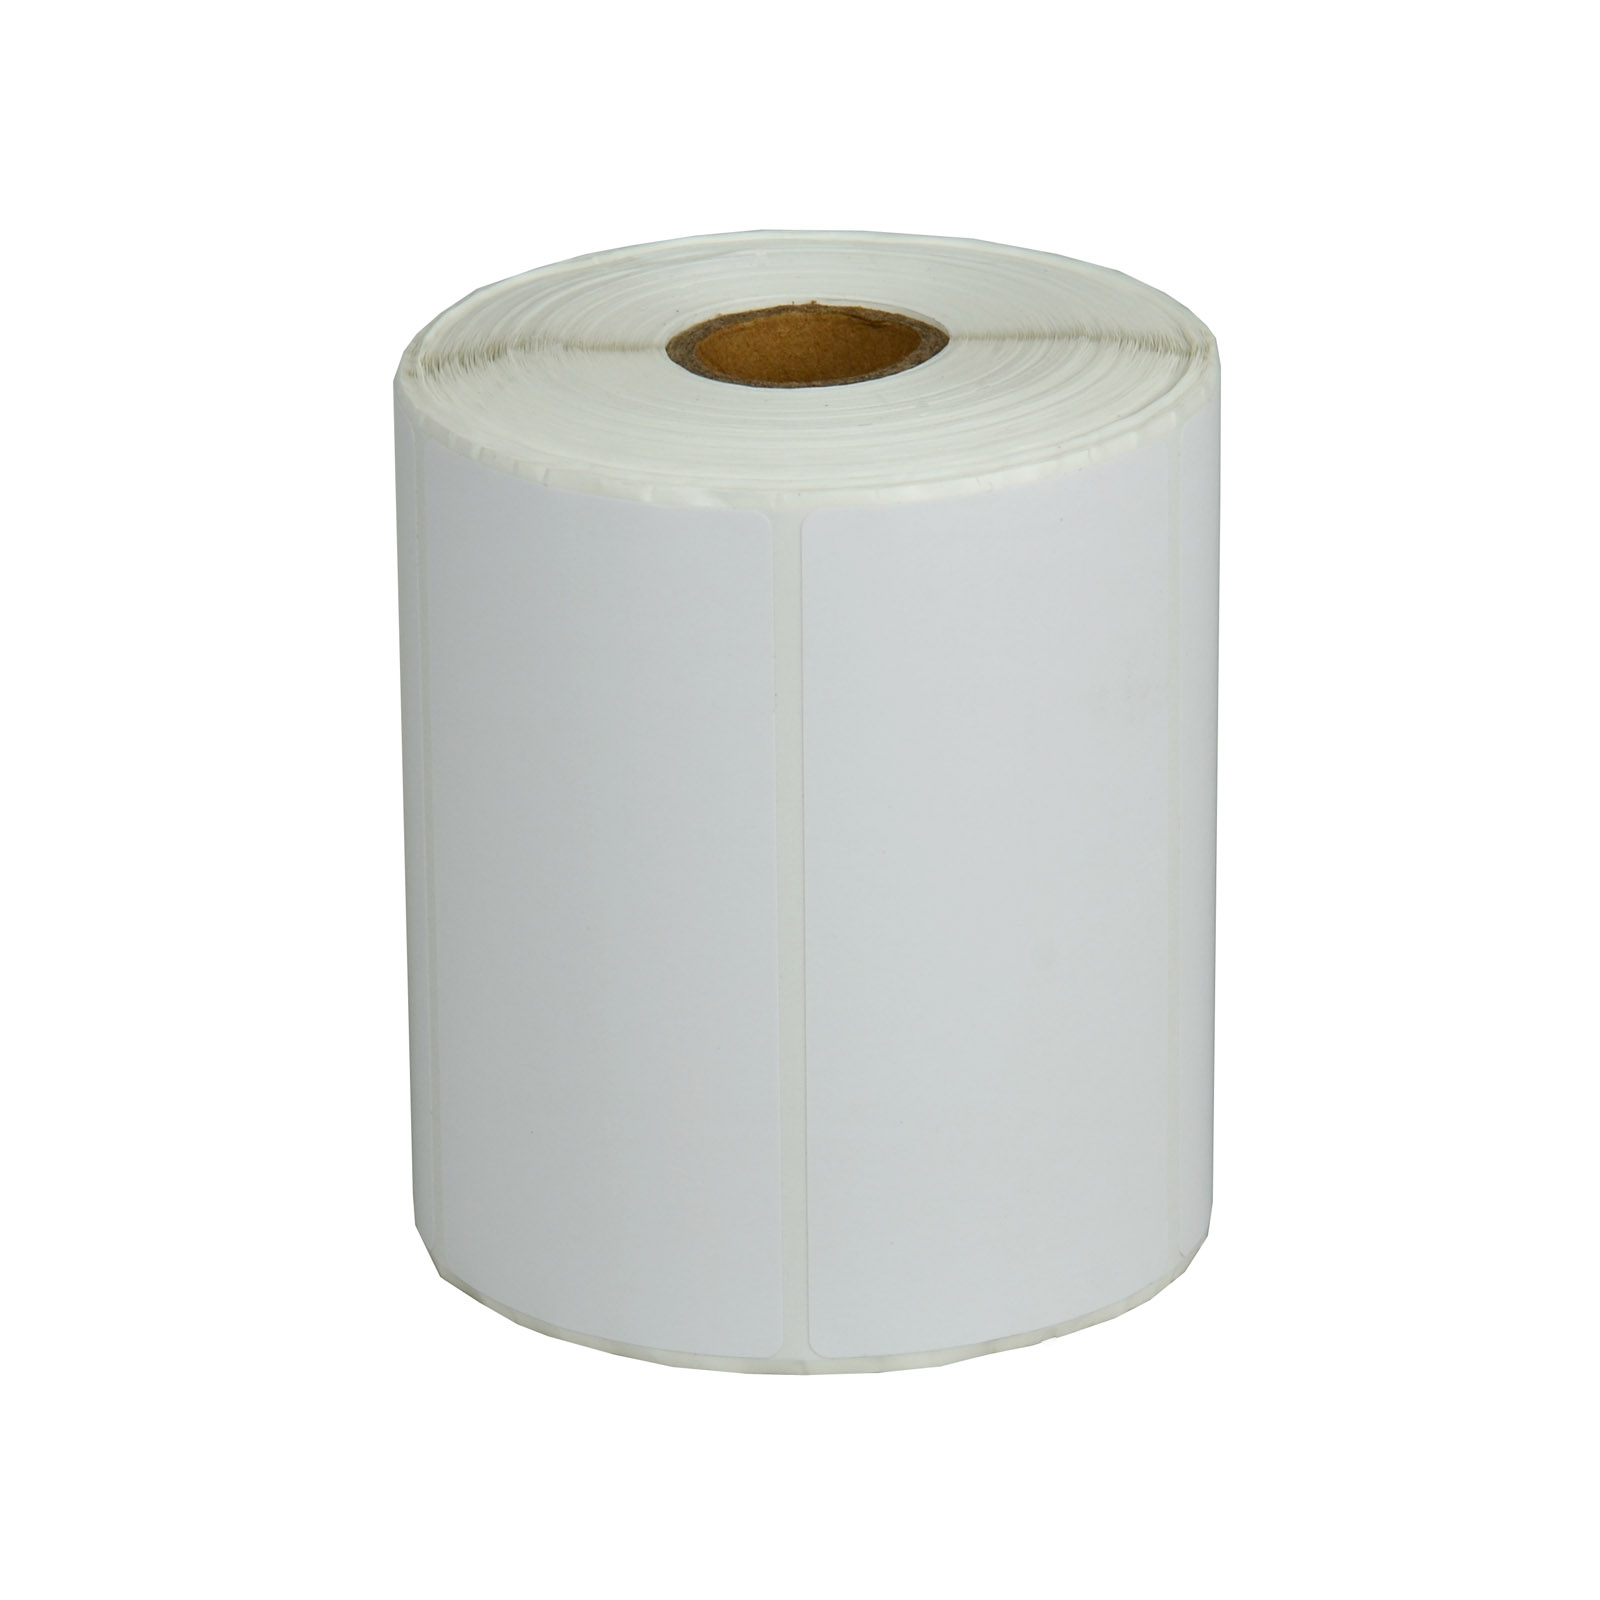 GREENCYCLE 5 Roll (810 labels per roll) White Die Cut Paper Label Compatible for Brother RDS03U1 4"x2" TD-4000 TD-4100N Printer